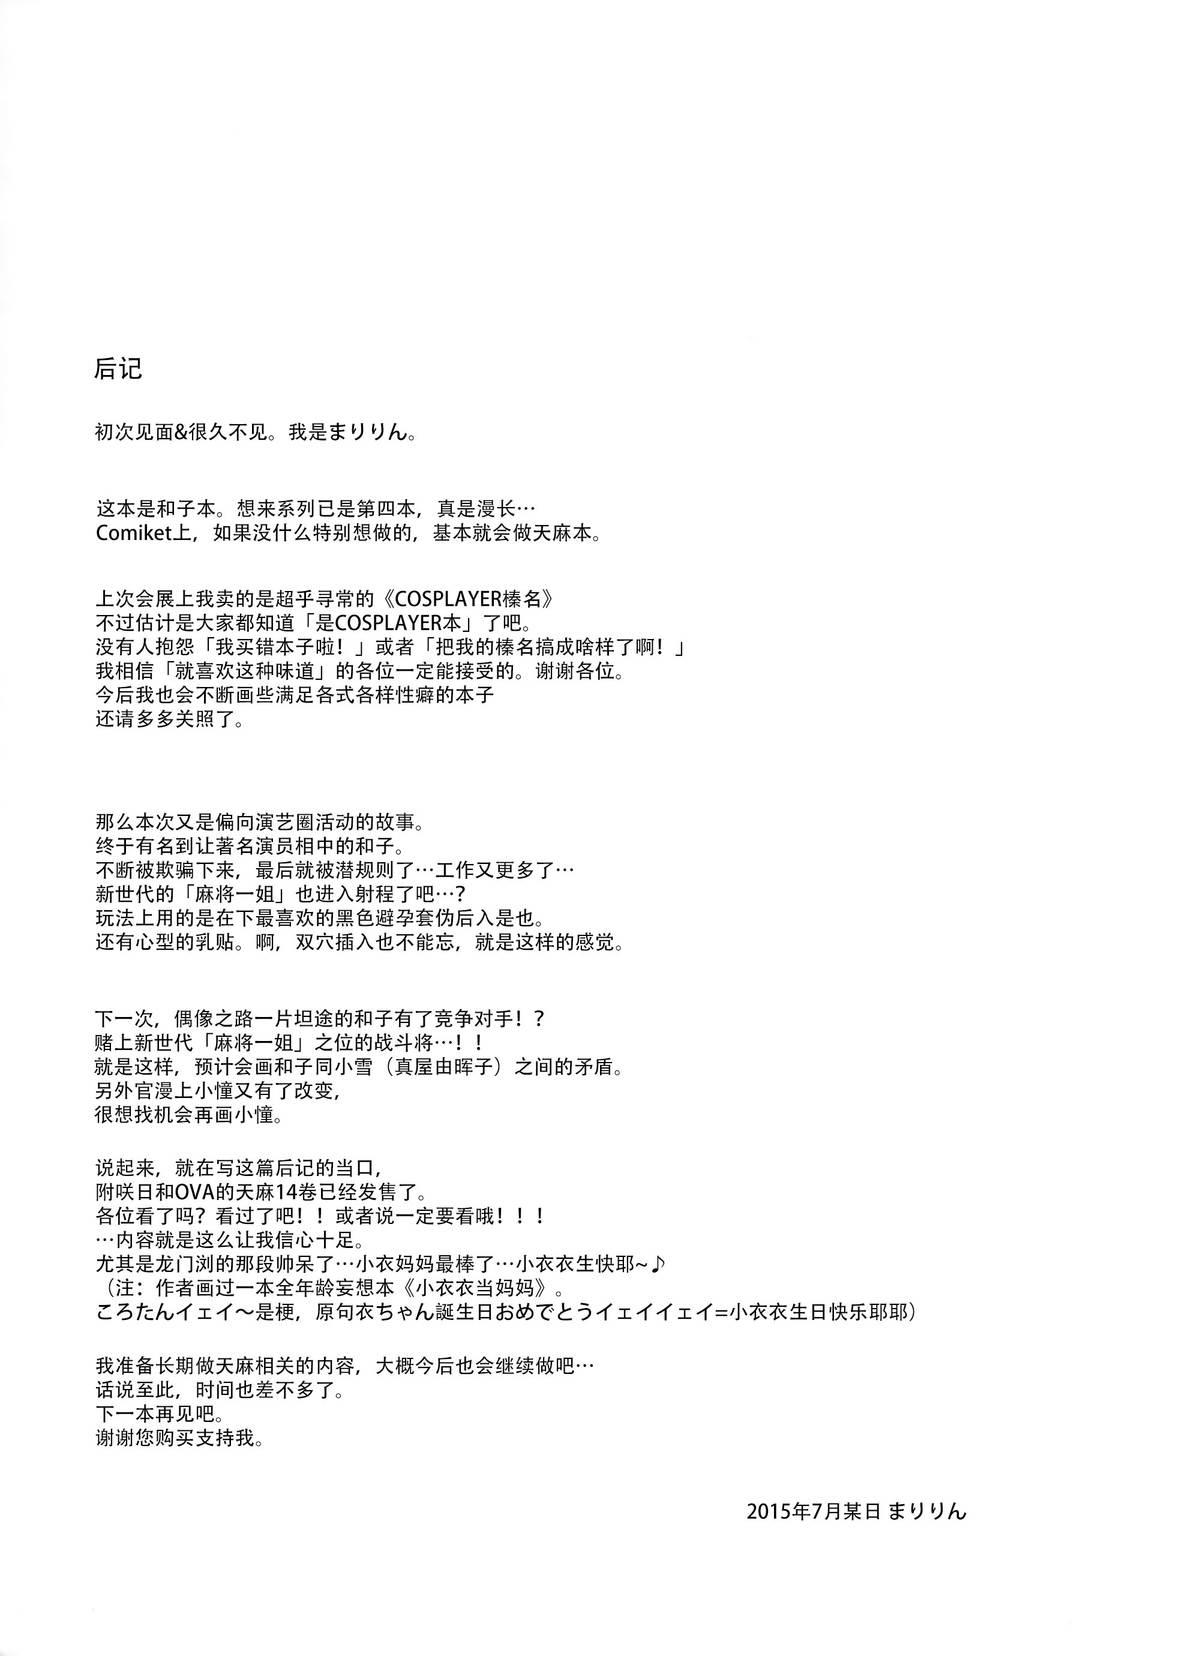 - Chinese translation (19 pages)-第1章-图片614